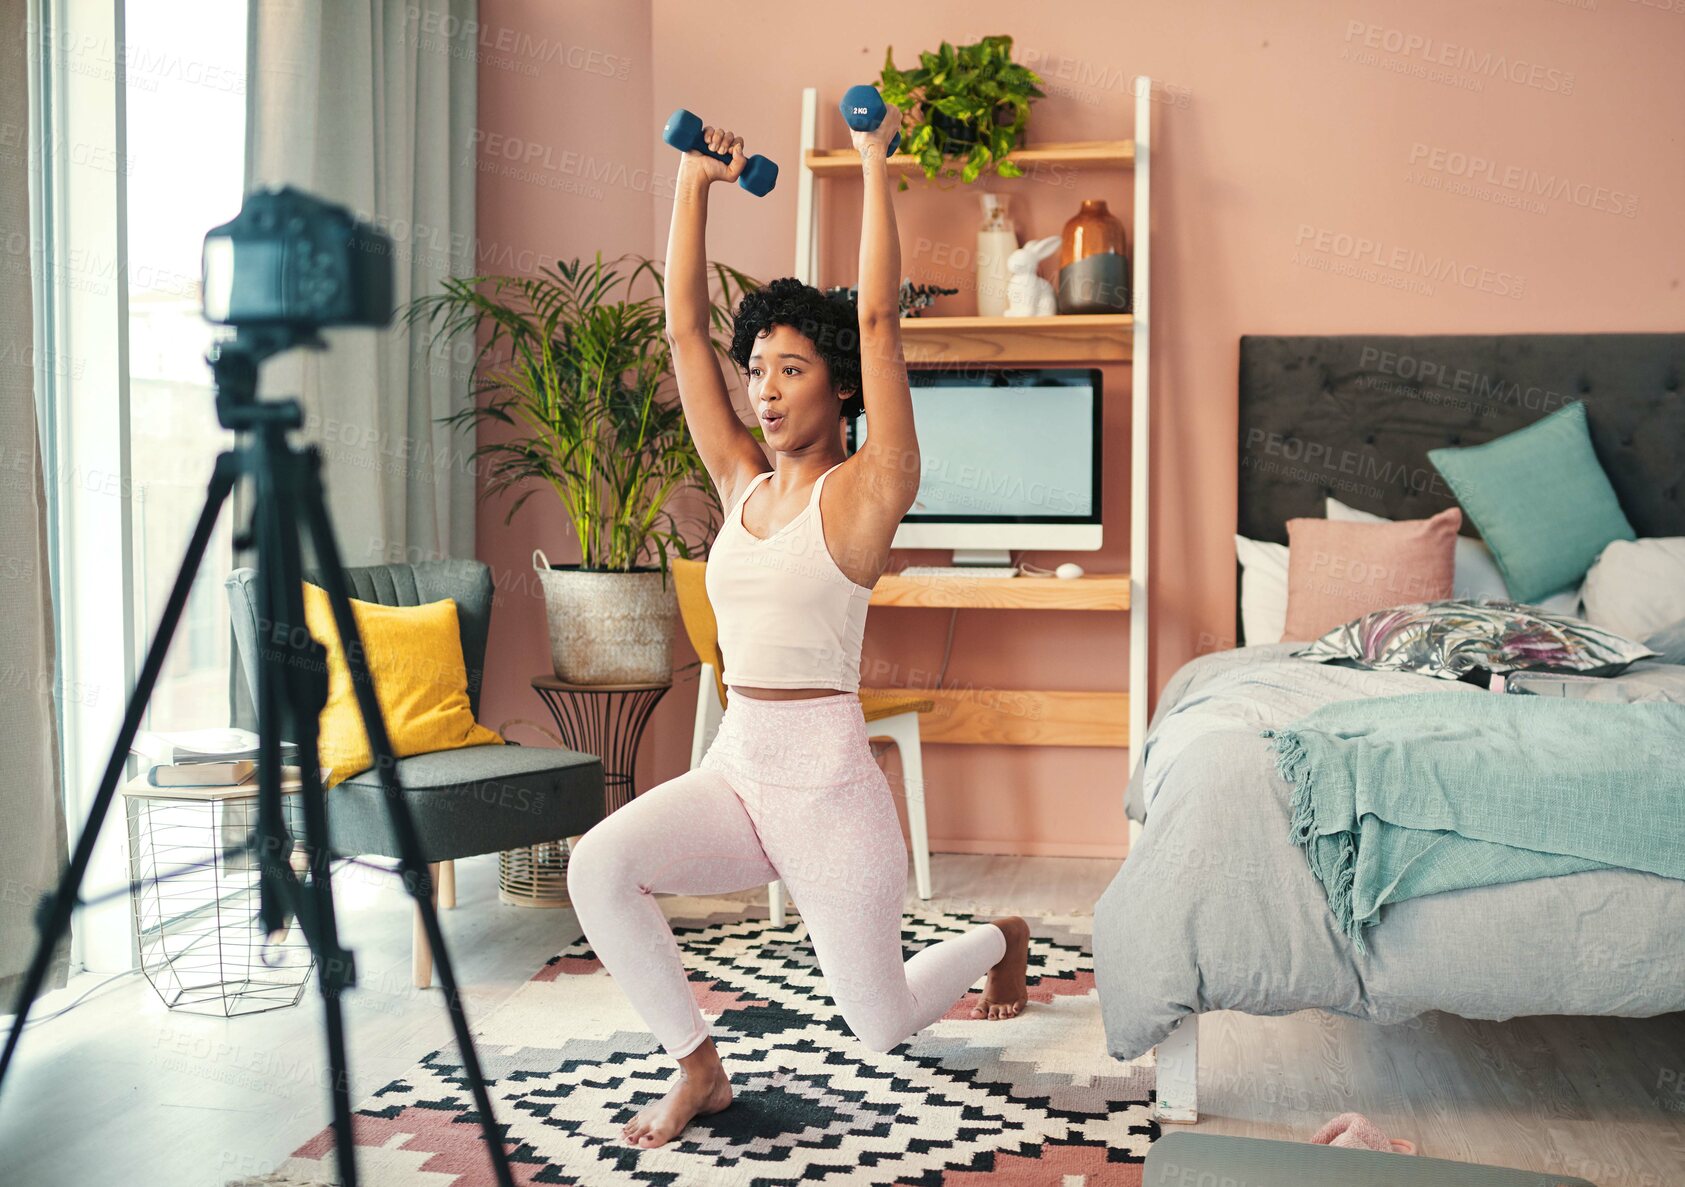 Buy stock photo Shot of a young woman recording herself while exercising at home